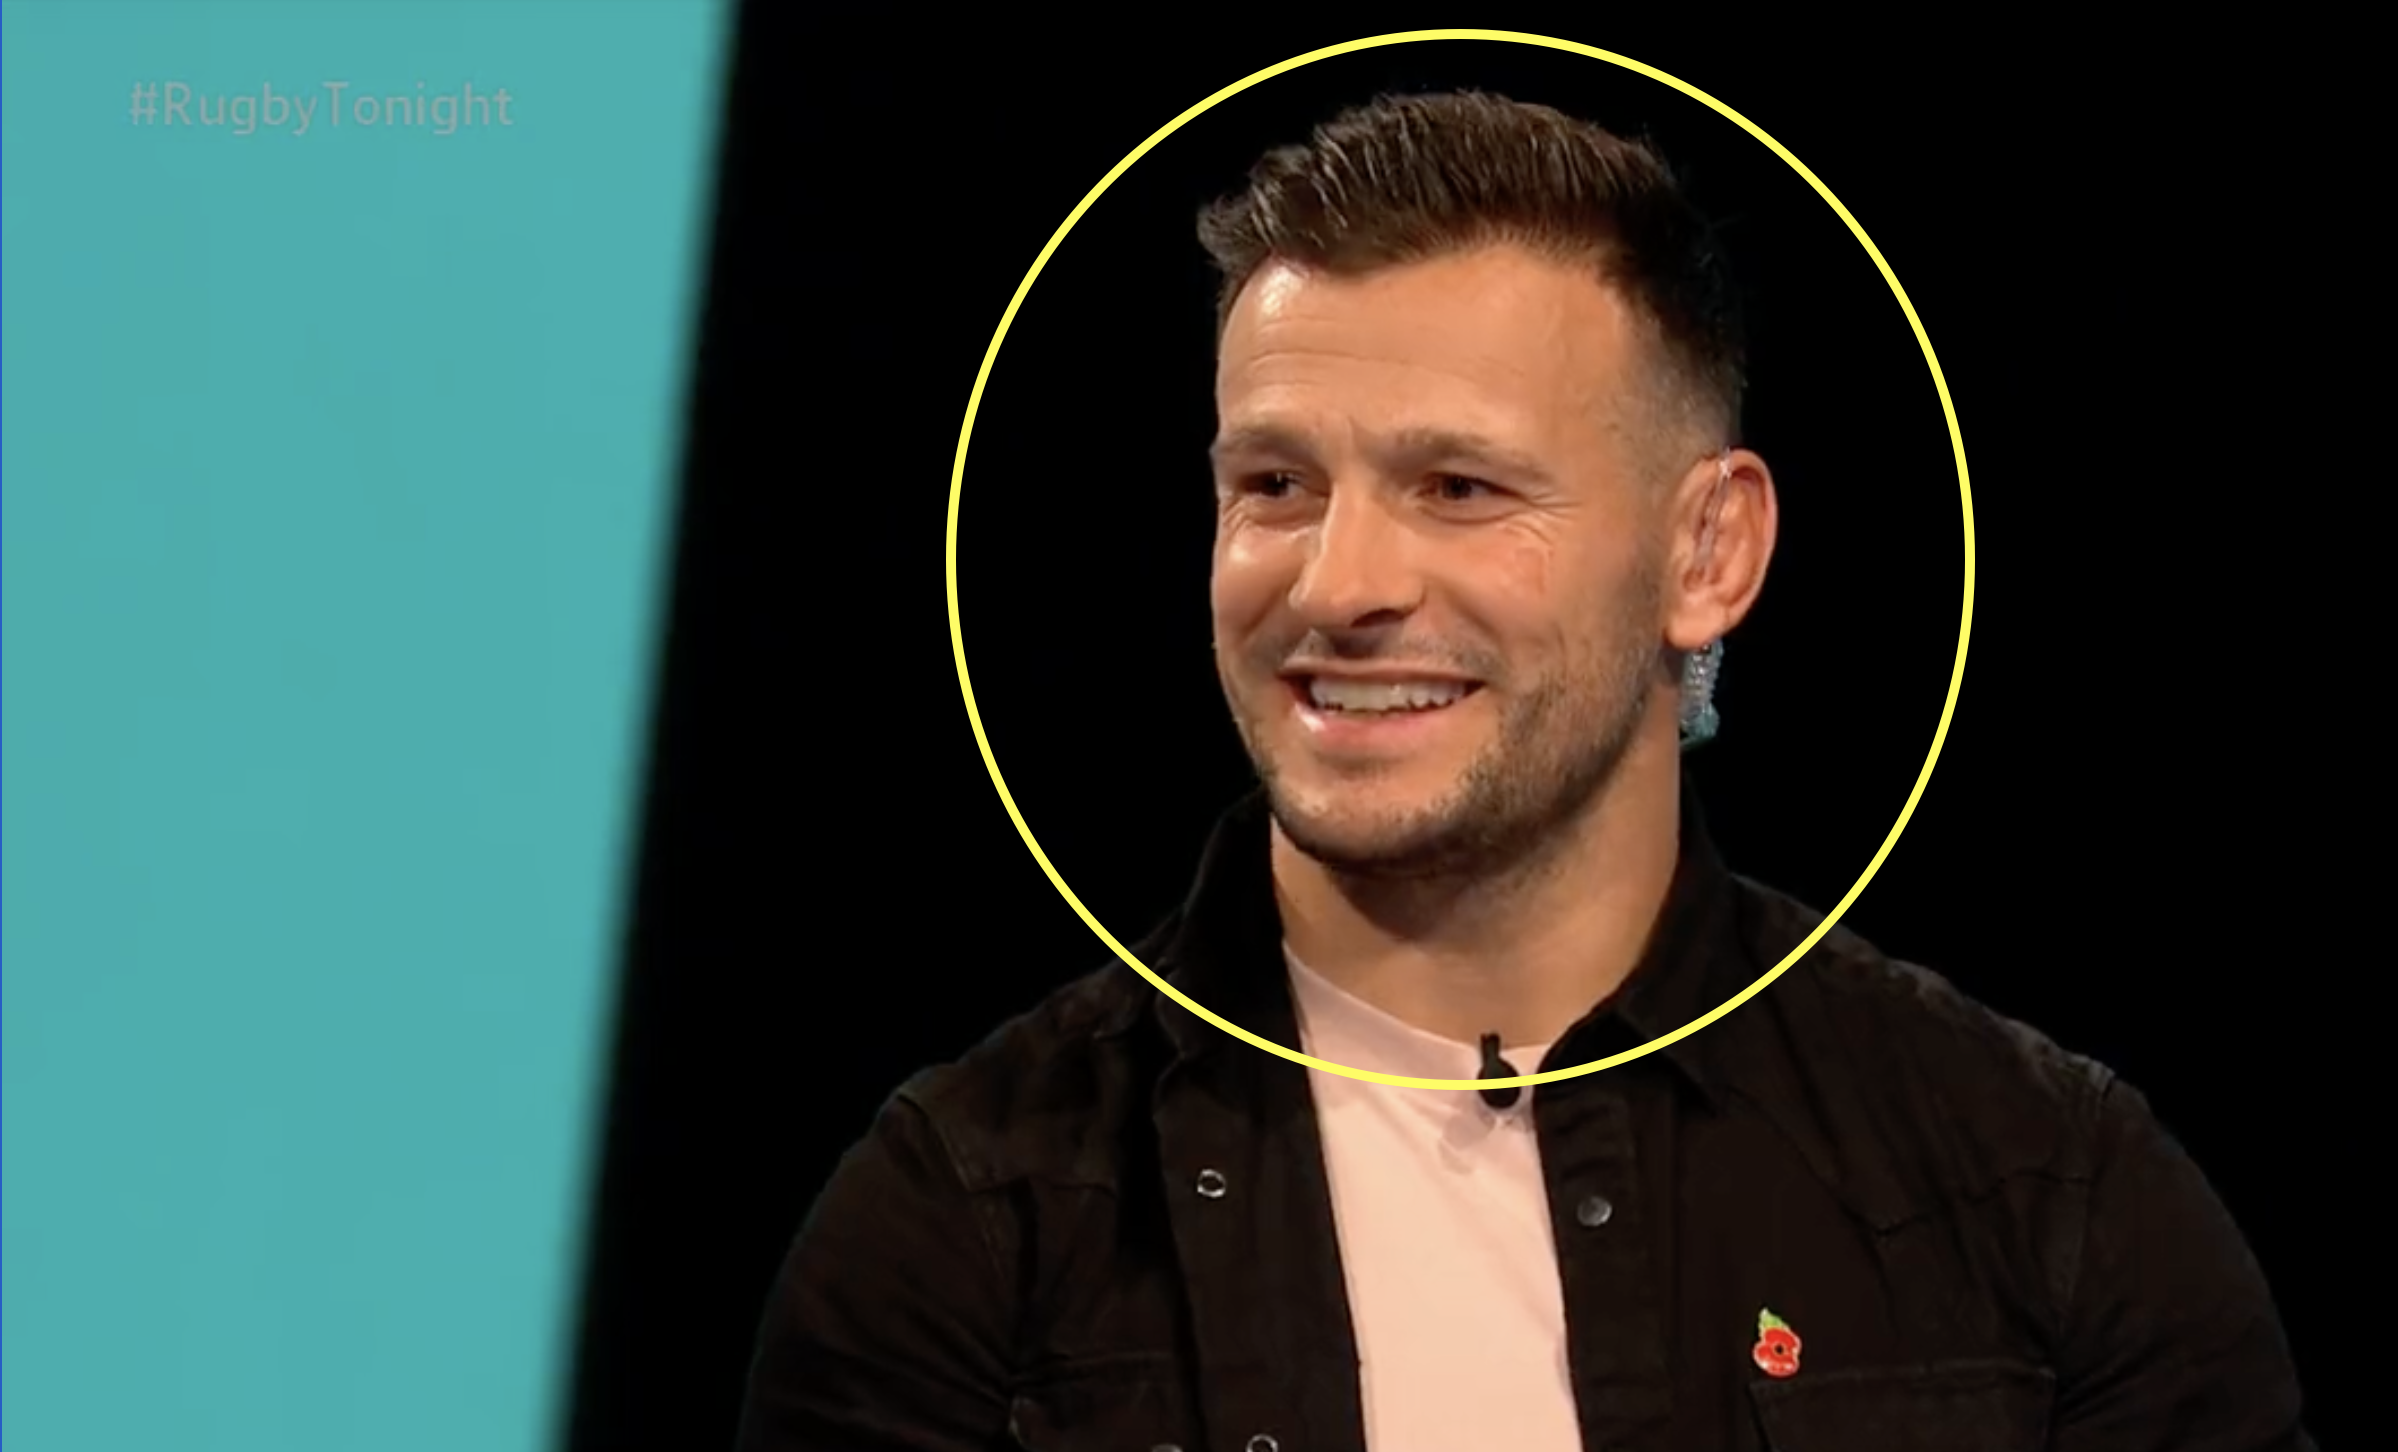 Danny Care shows his class after missing out on England squad